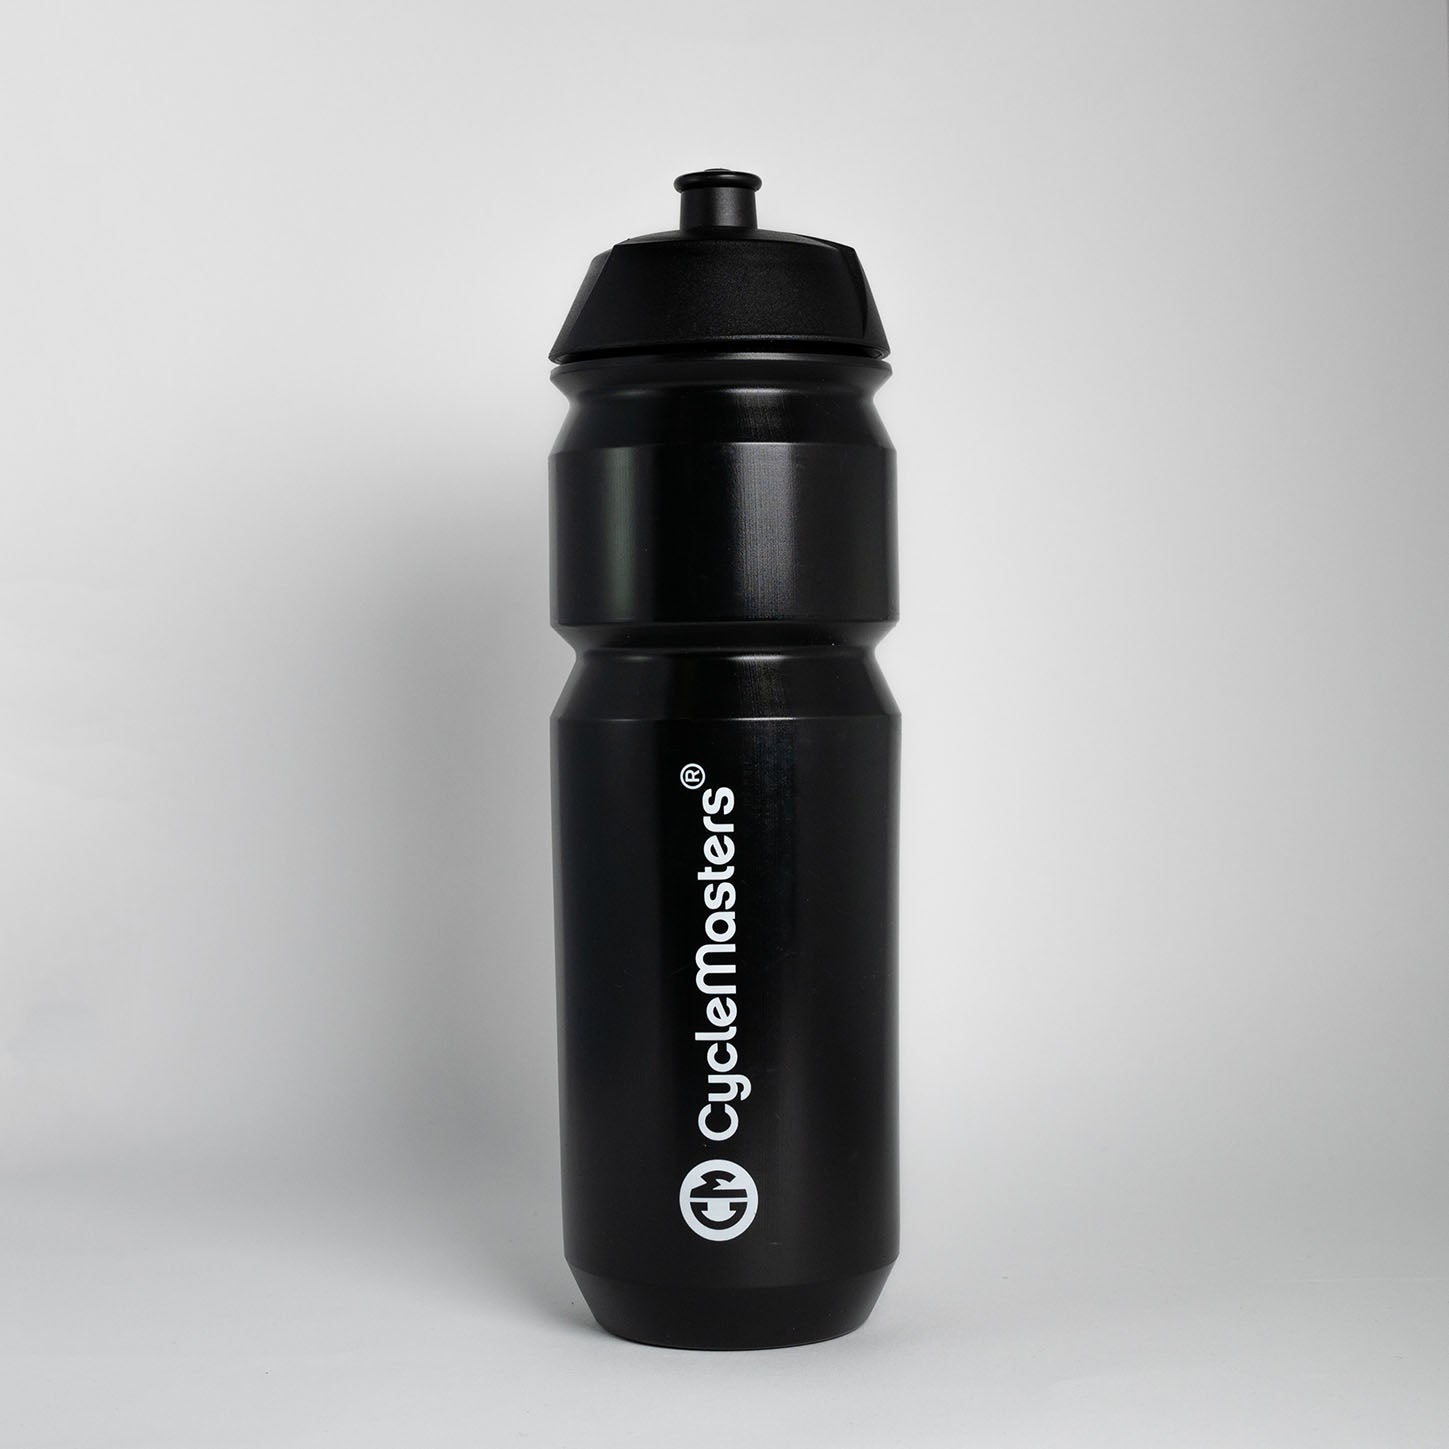 bottle with the cyclemasters logo